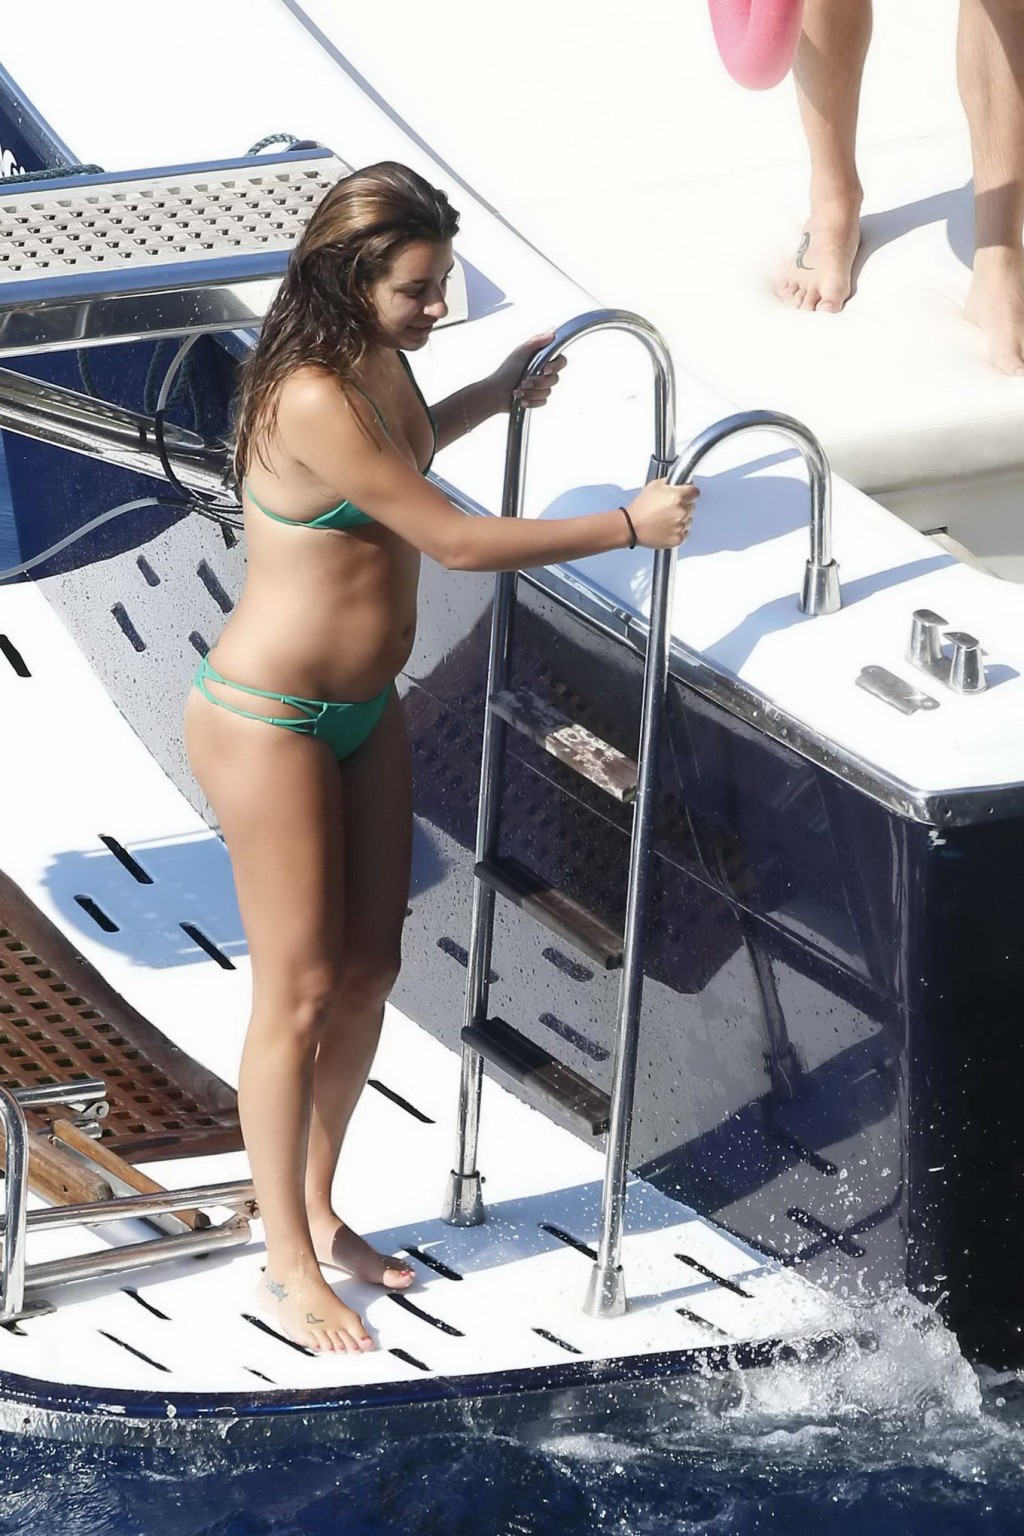 Lea Michele nipple slip from her tiny green bikini on the boat during a vacation #75189824